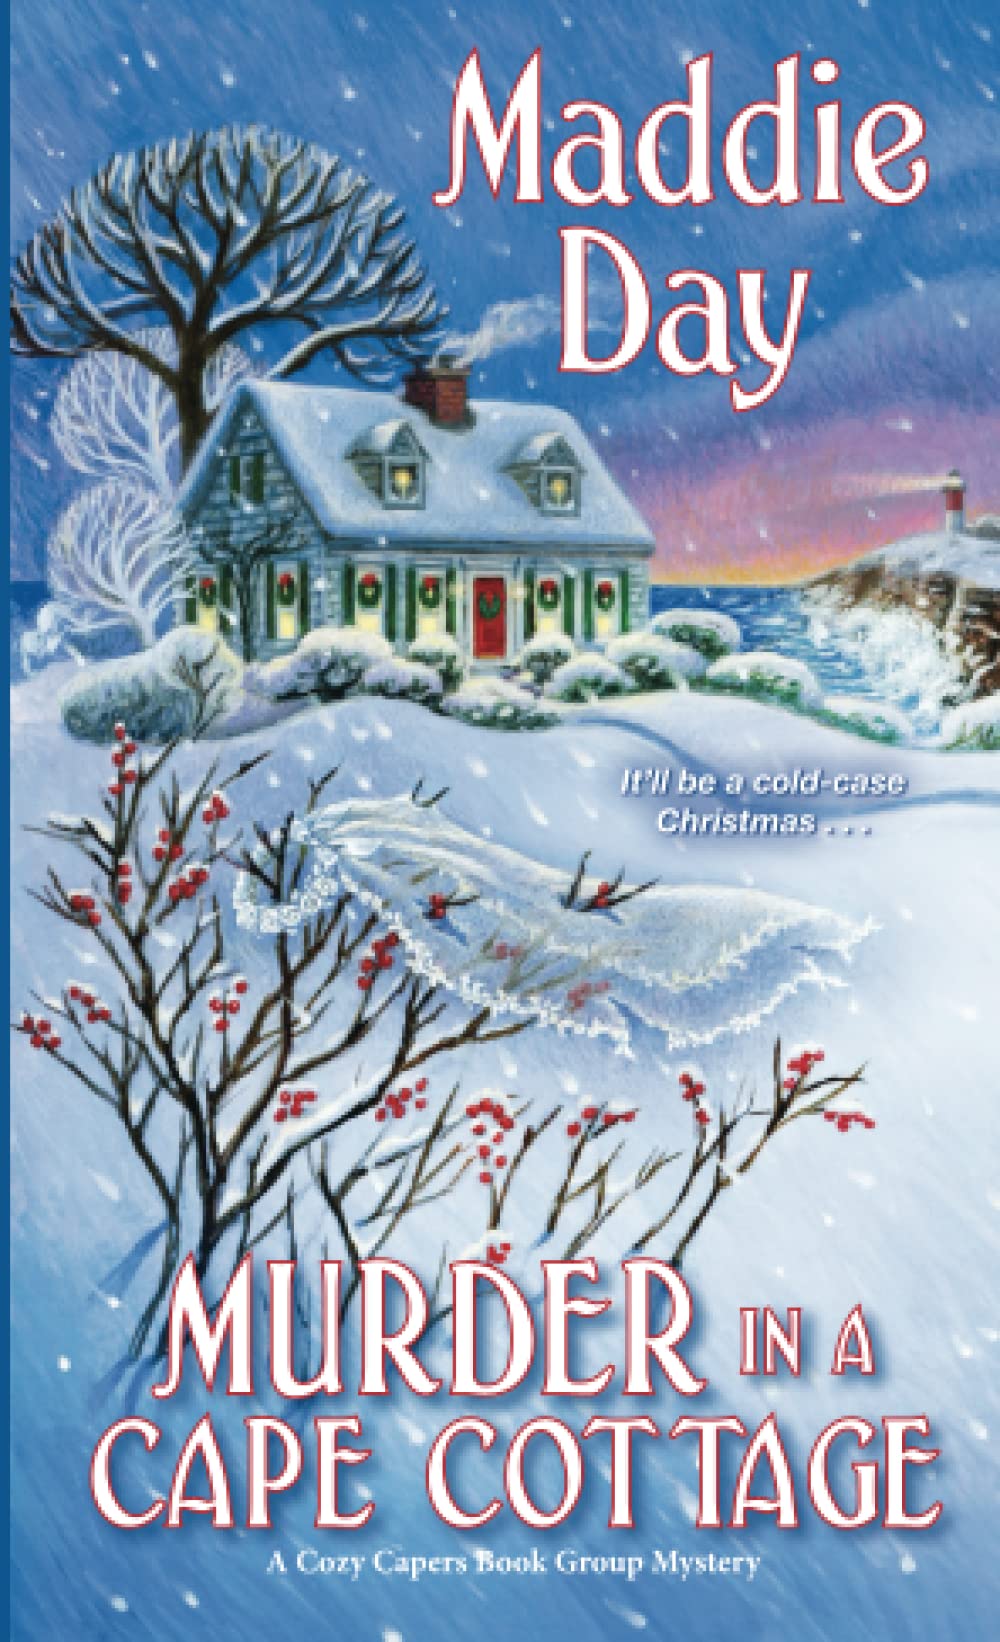 Murder in a Cape Cottage (A Cozy Capers Book Group Mystery)